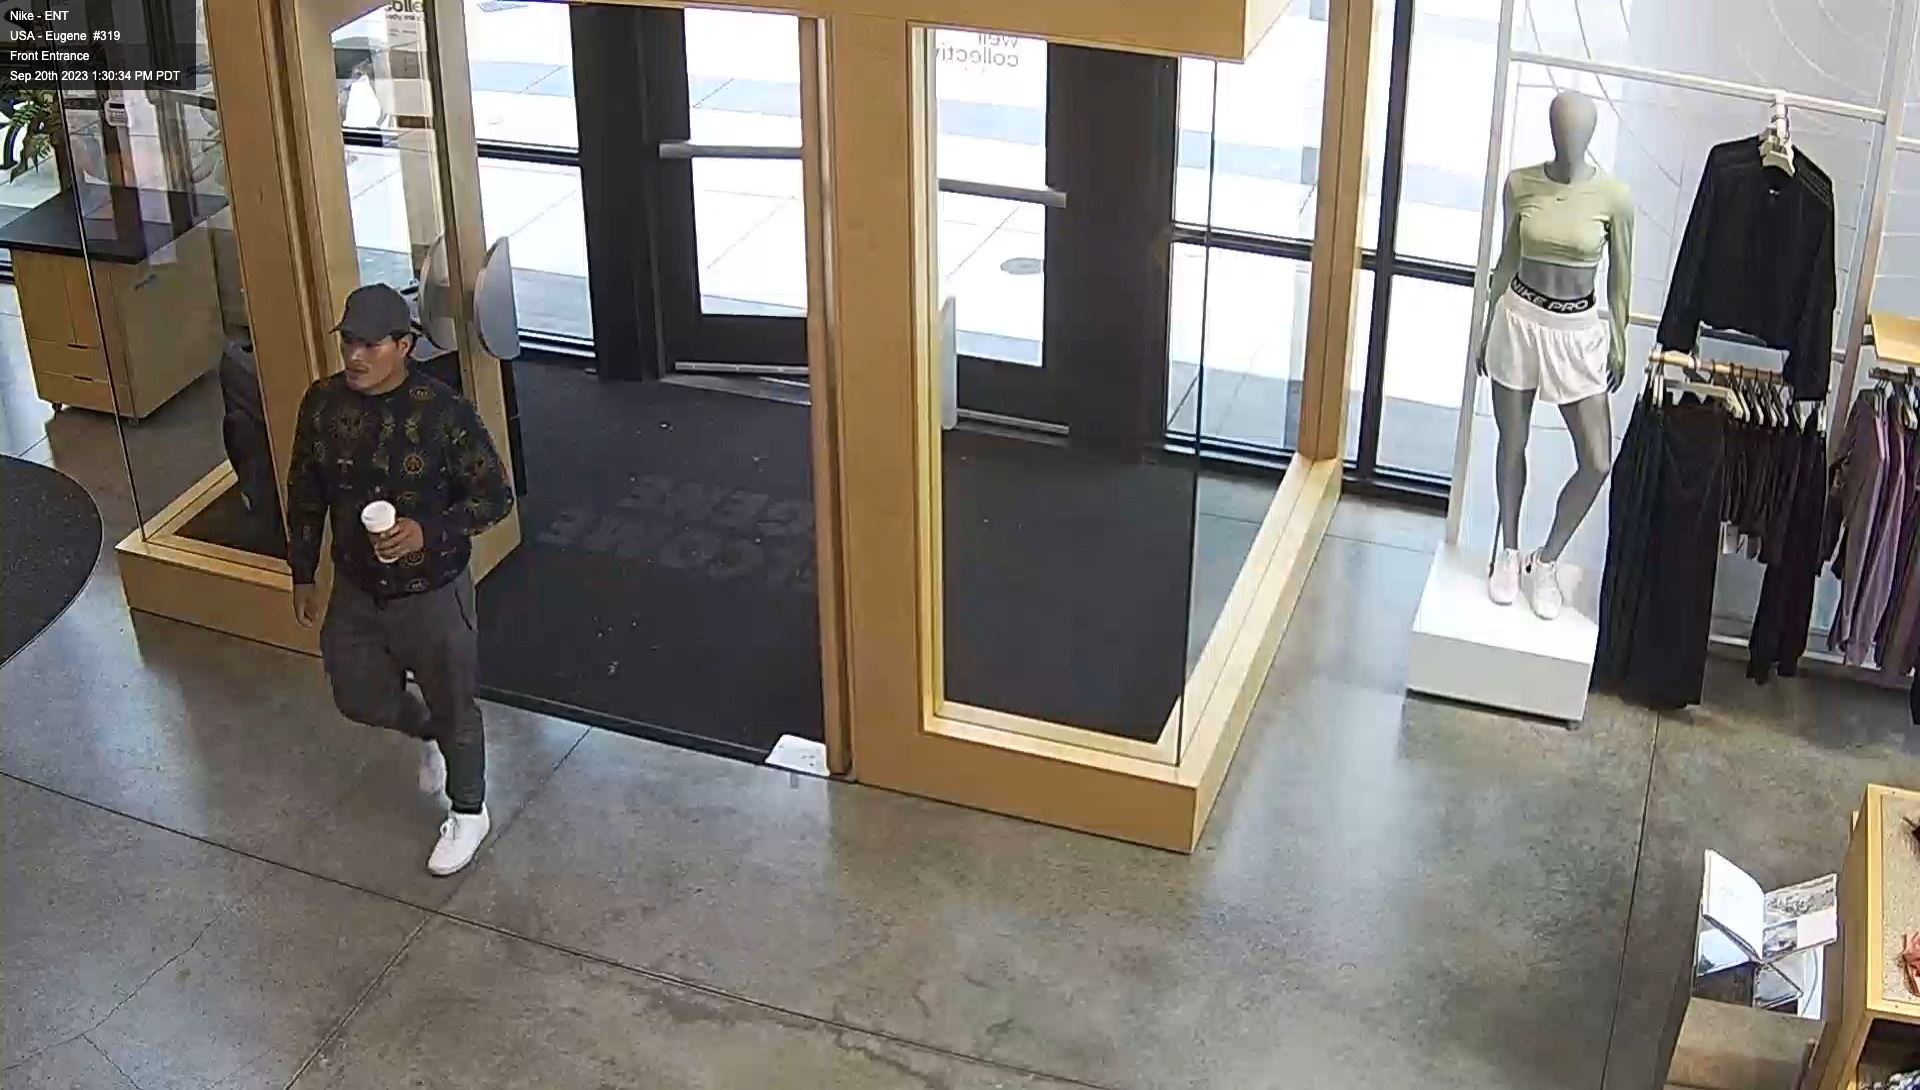 Suspect 2 from Jazzy Cafe inside Nike store